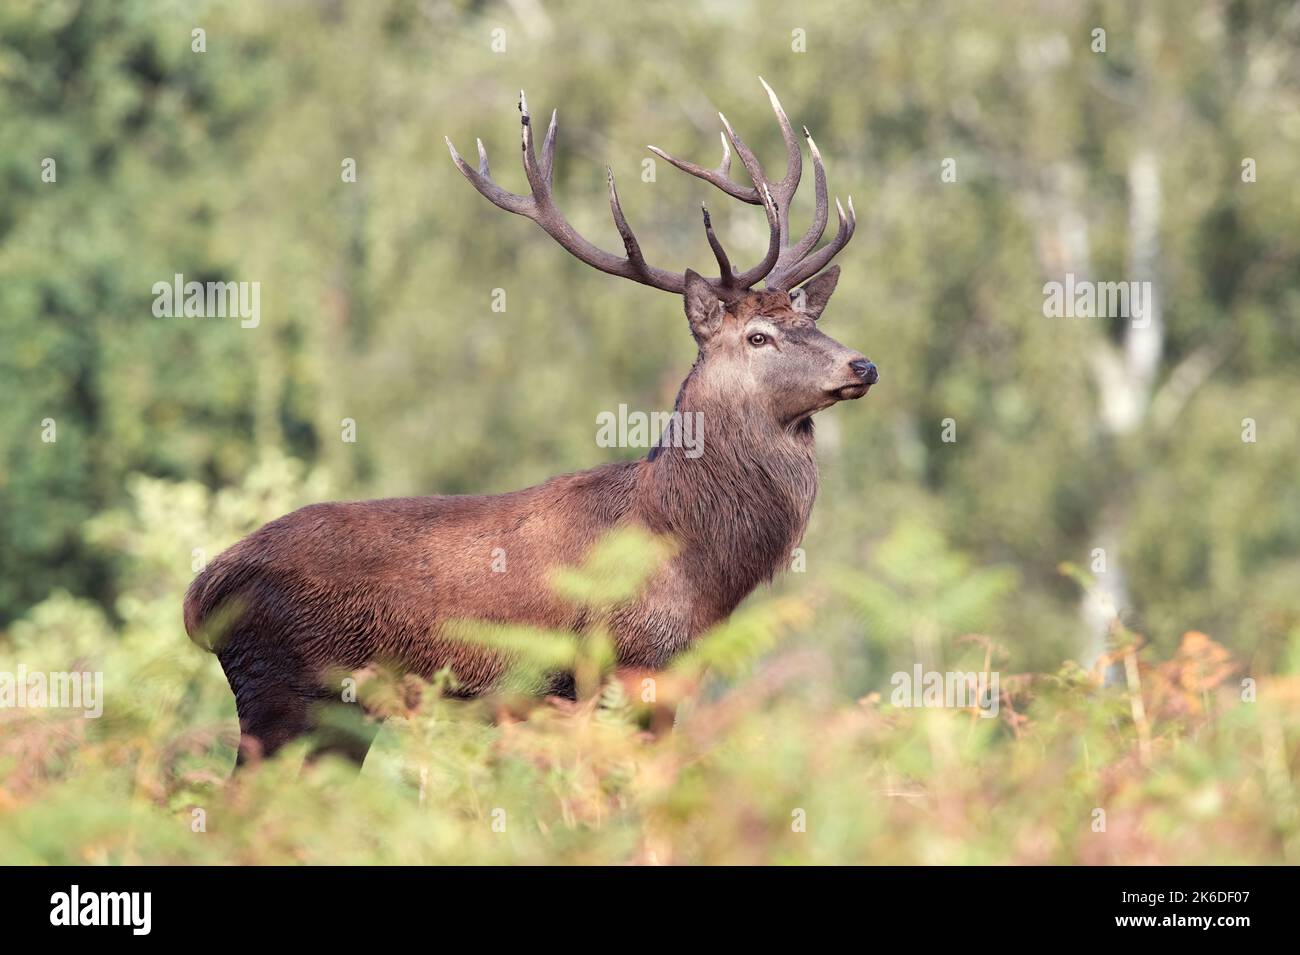 Red Deer Stag (Cervus elaphus) at the edge of ancient forest Stock Photo